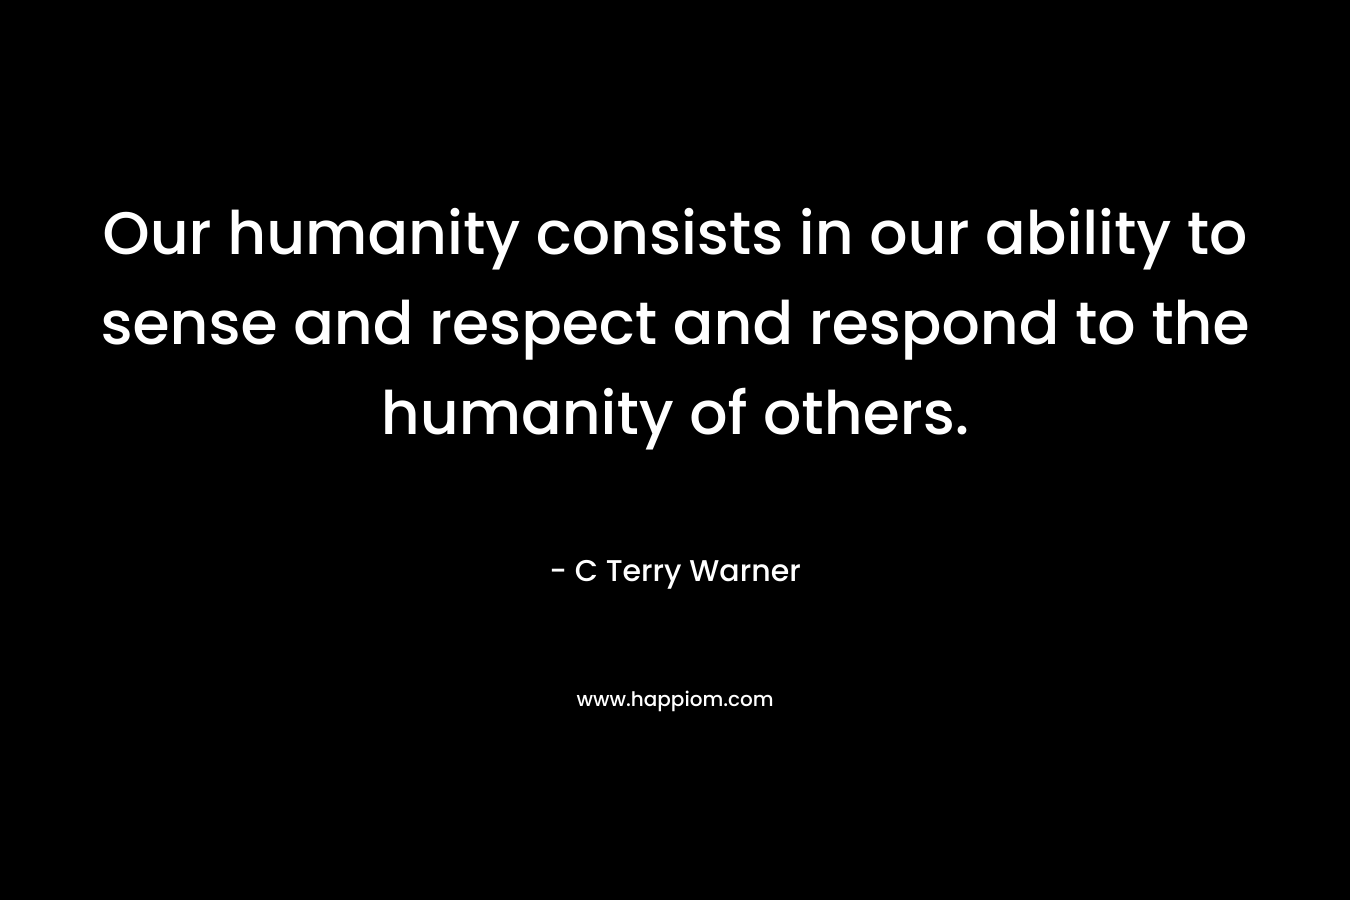 Our humanity consists in our ability to sense and respect and respond to the humanity of others.